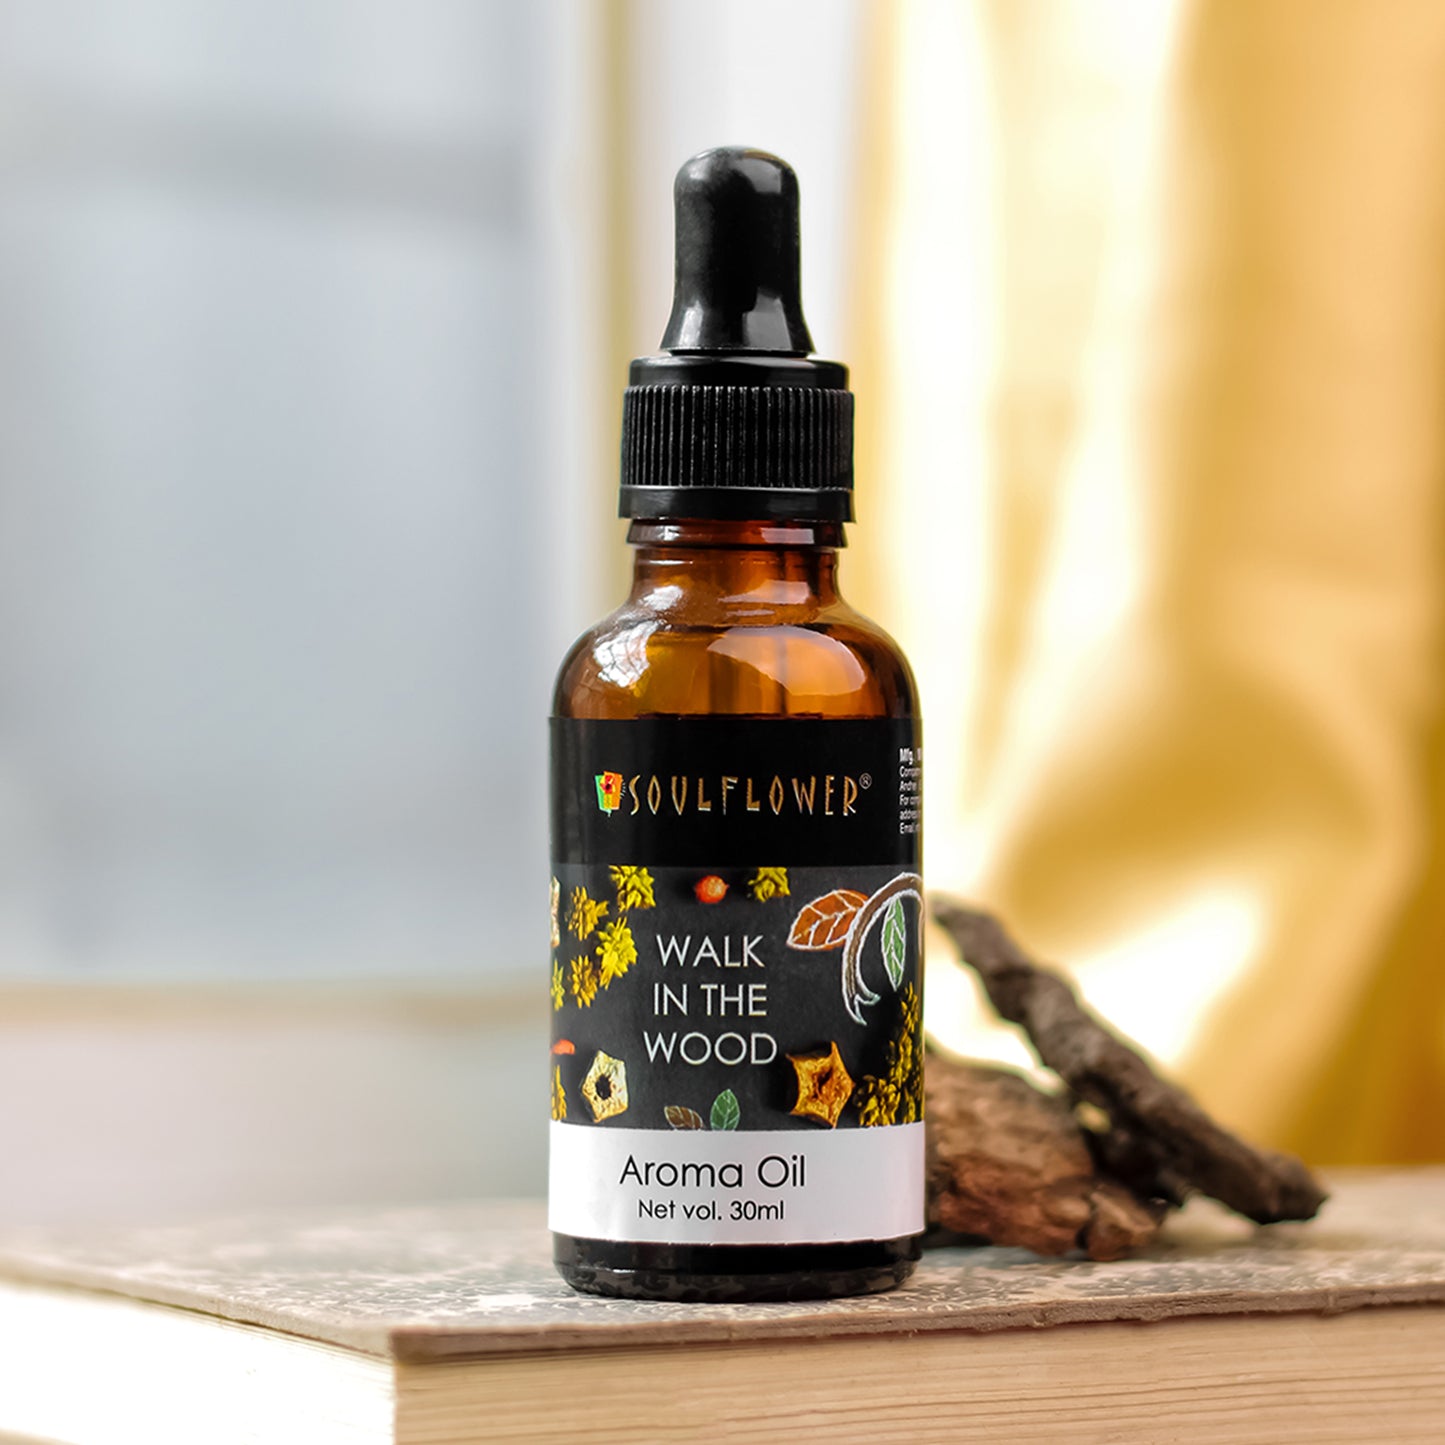 Walk in the Wood Aroma Oil